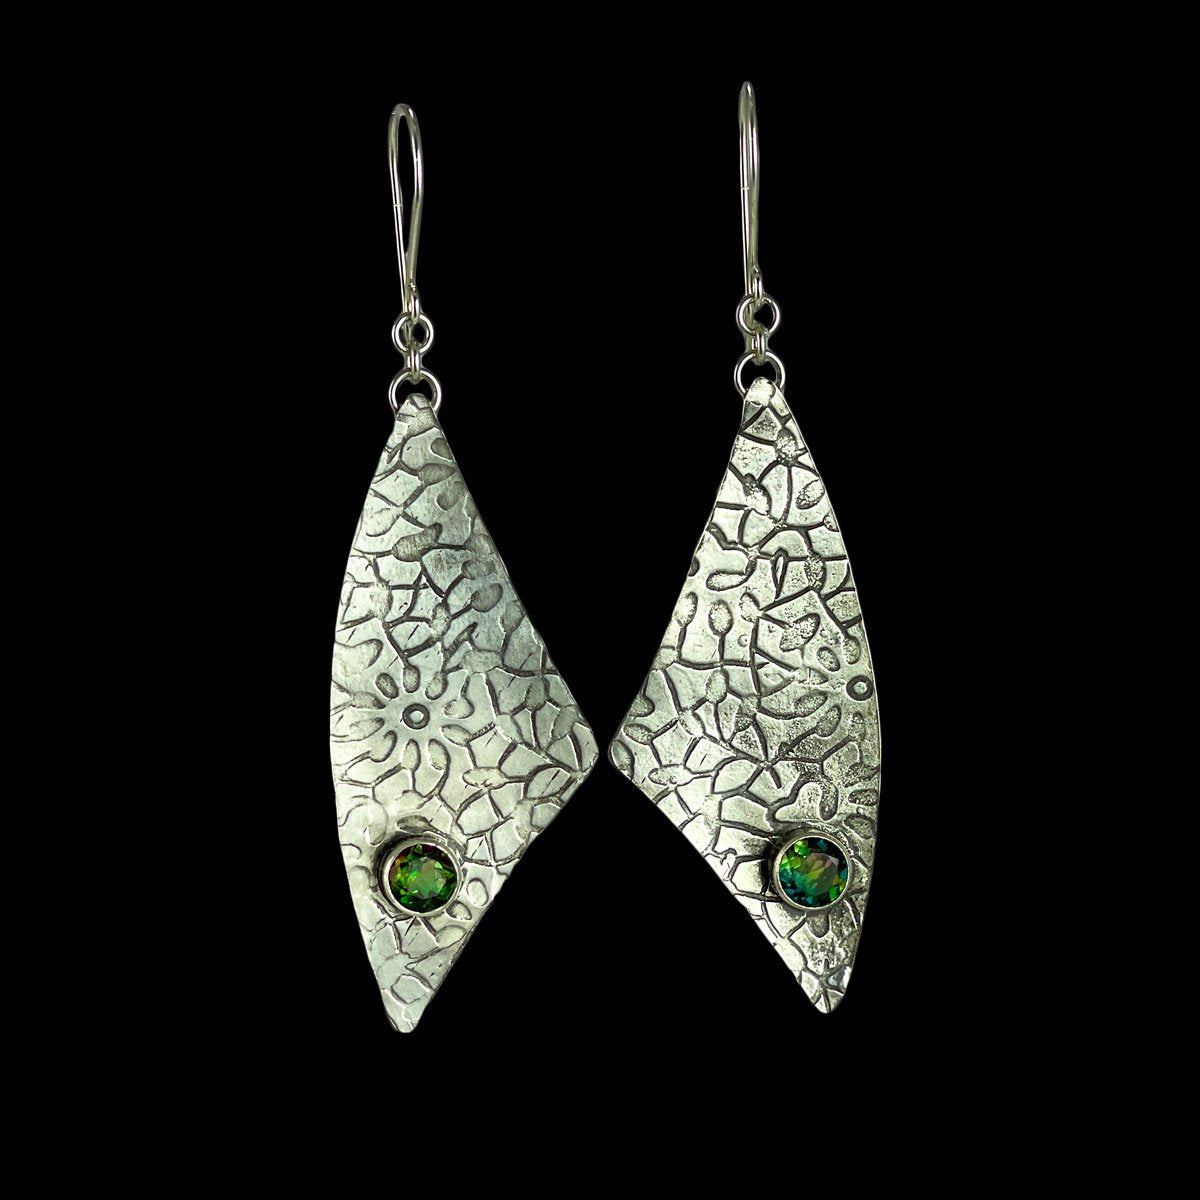 Textured Sterling Silver Large Sail Earrings with Faceted Tourmaline accent